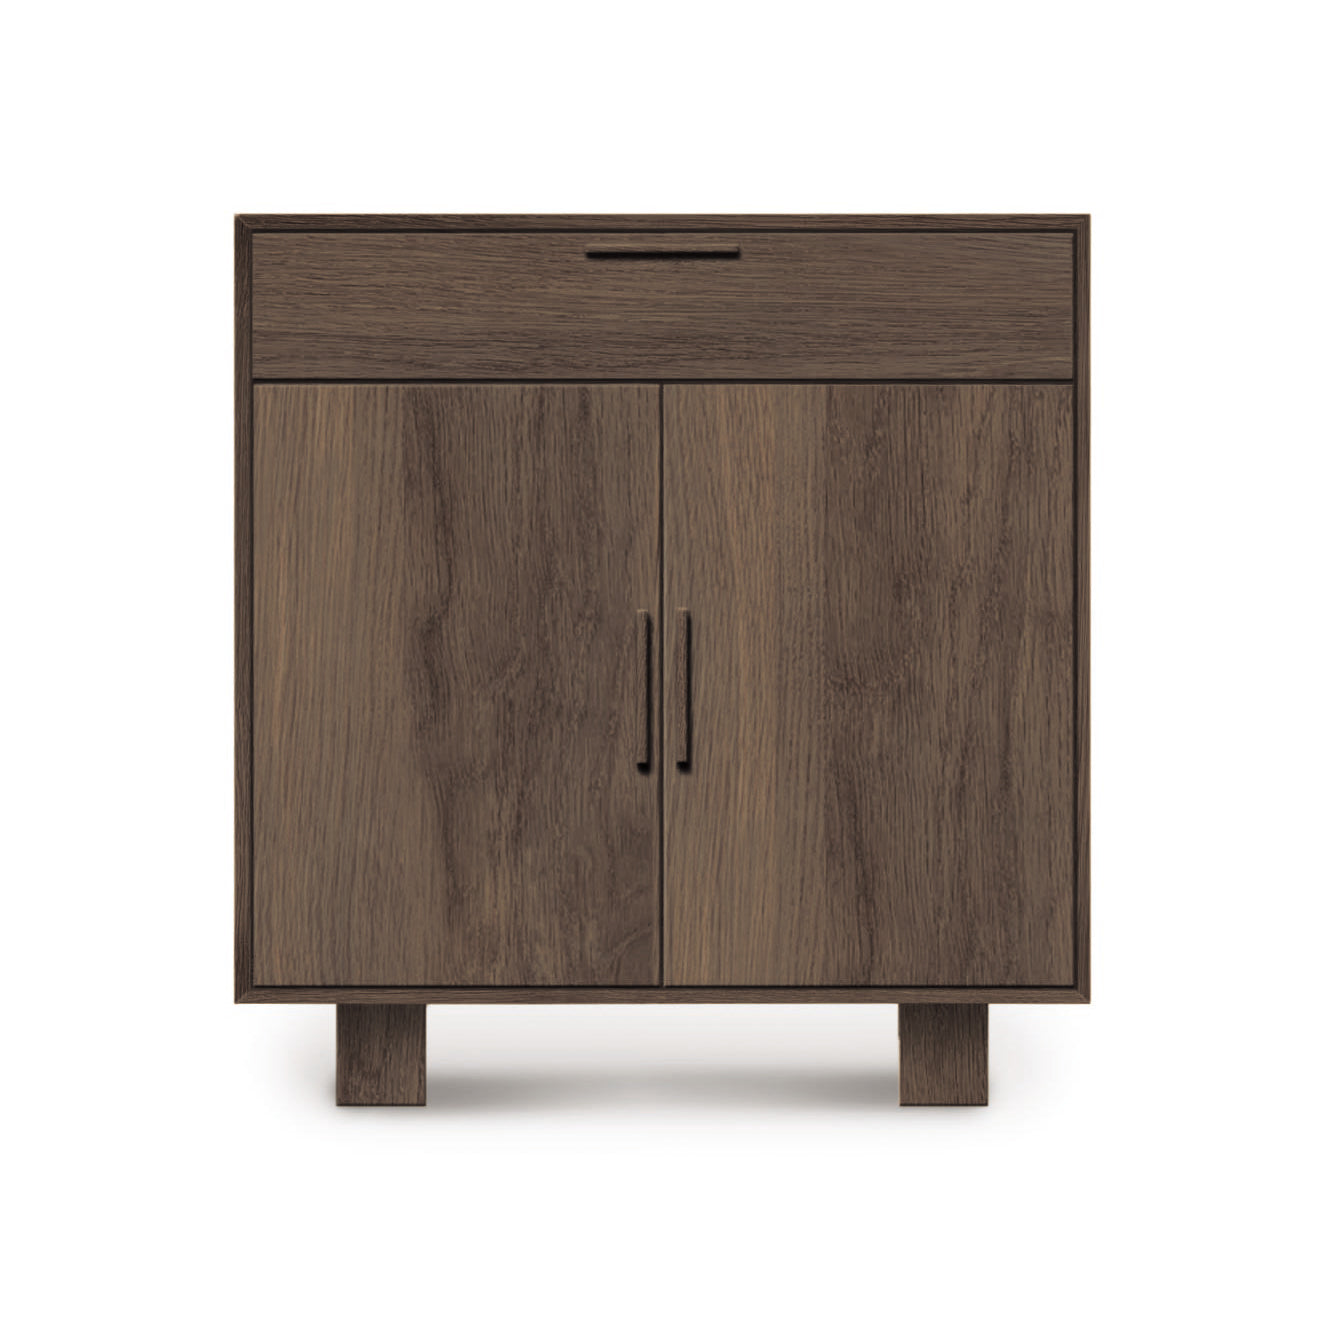 A Copeland Furniture Iso 2 Door, 1 Drawer Buffet with a Mid-Century Modern Style wooden cabinet with a single drawer and double doors, standing on four legs, isolated on a white background.